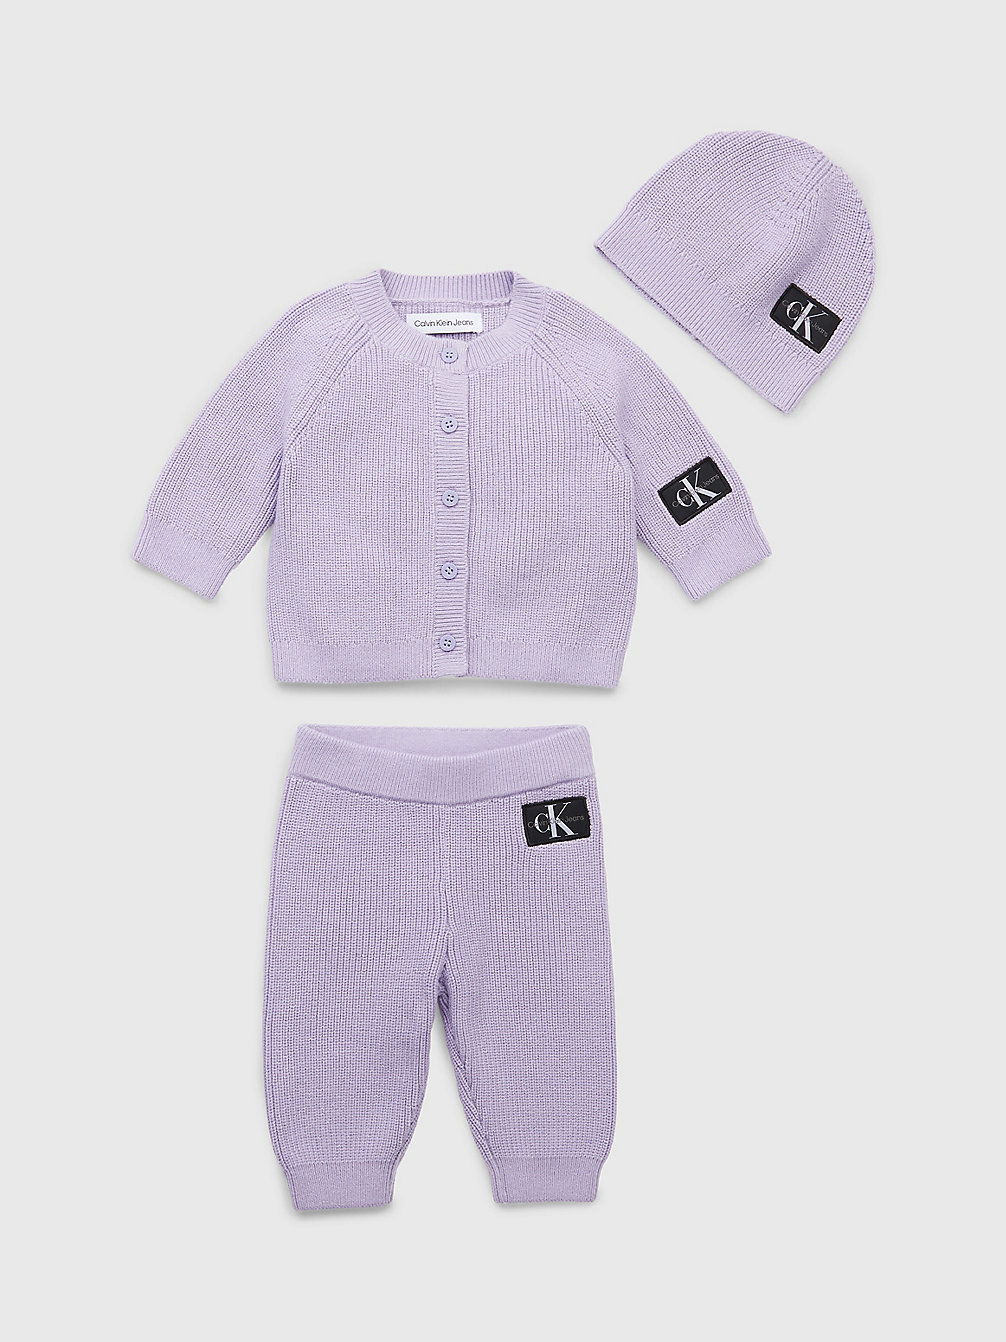 SMOKY LILAC Newborn Tracksuit And Hat Giftpack undefined newborn Calvin Klein